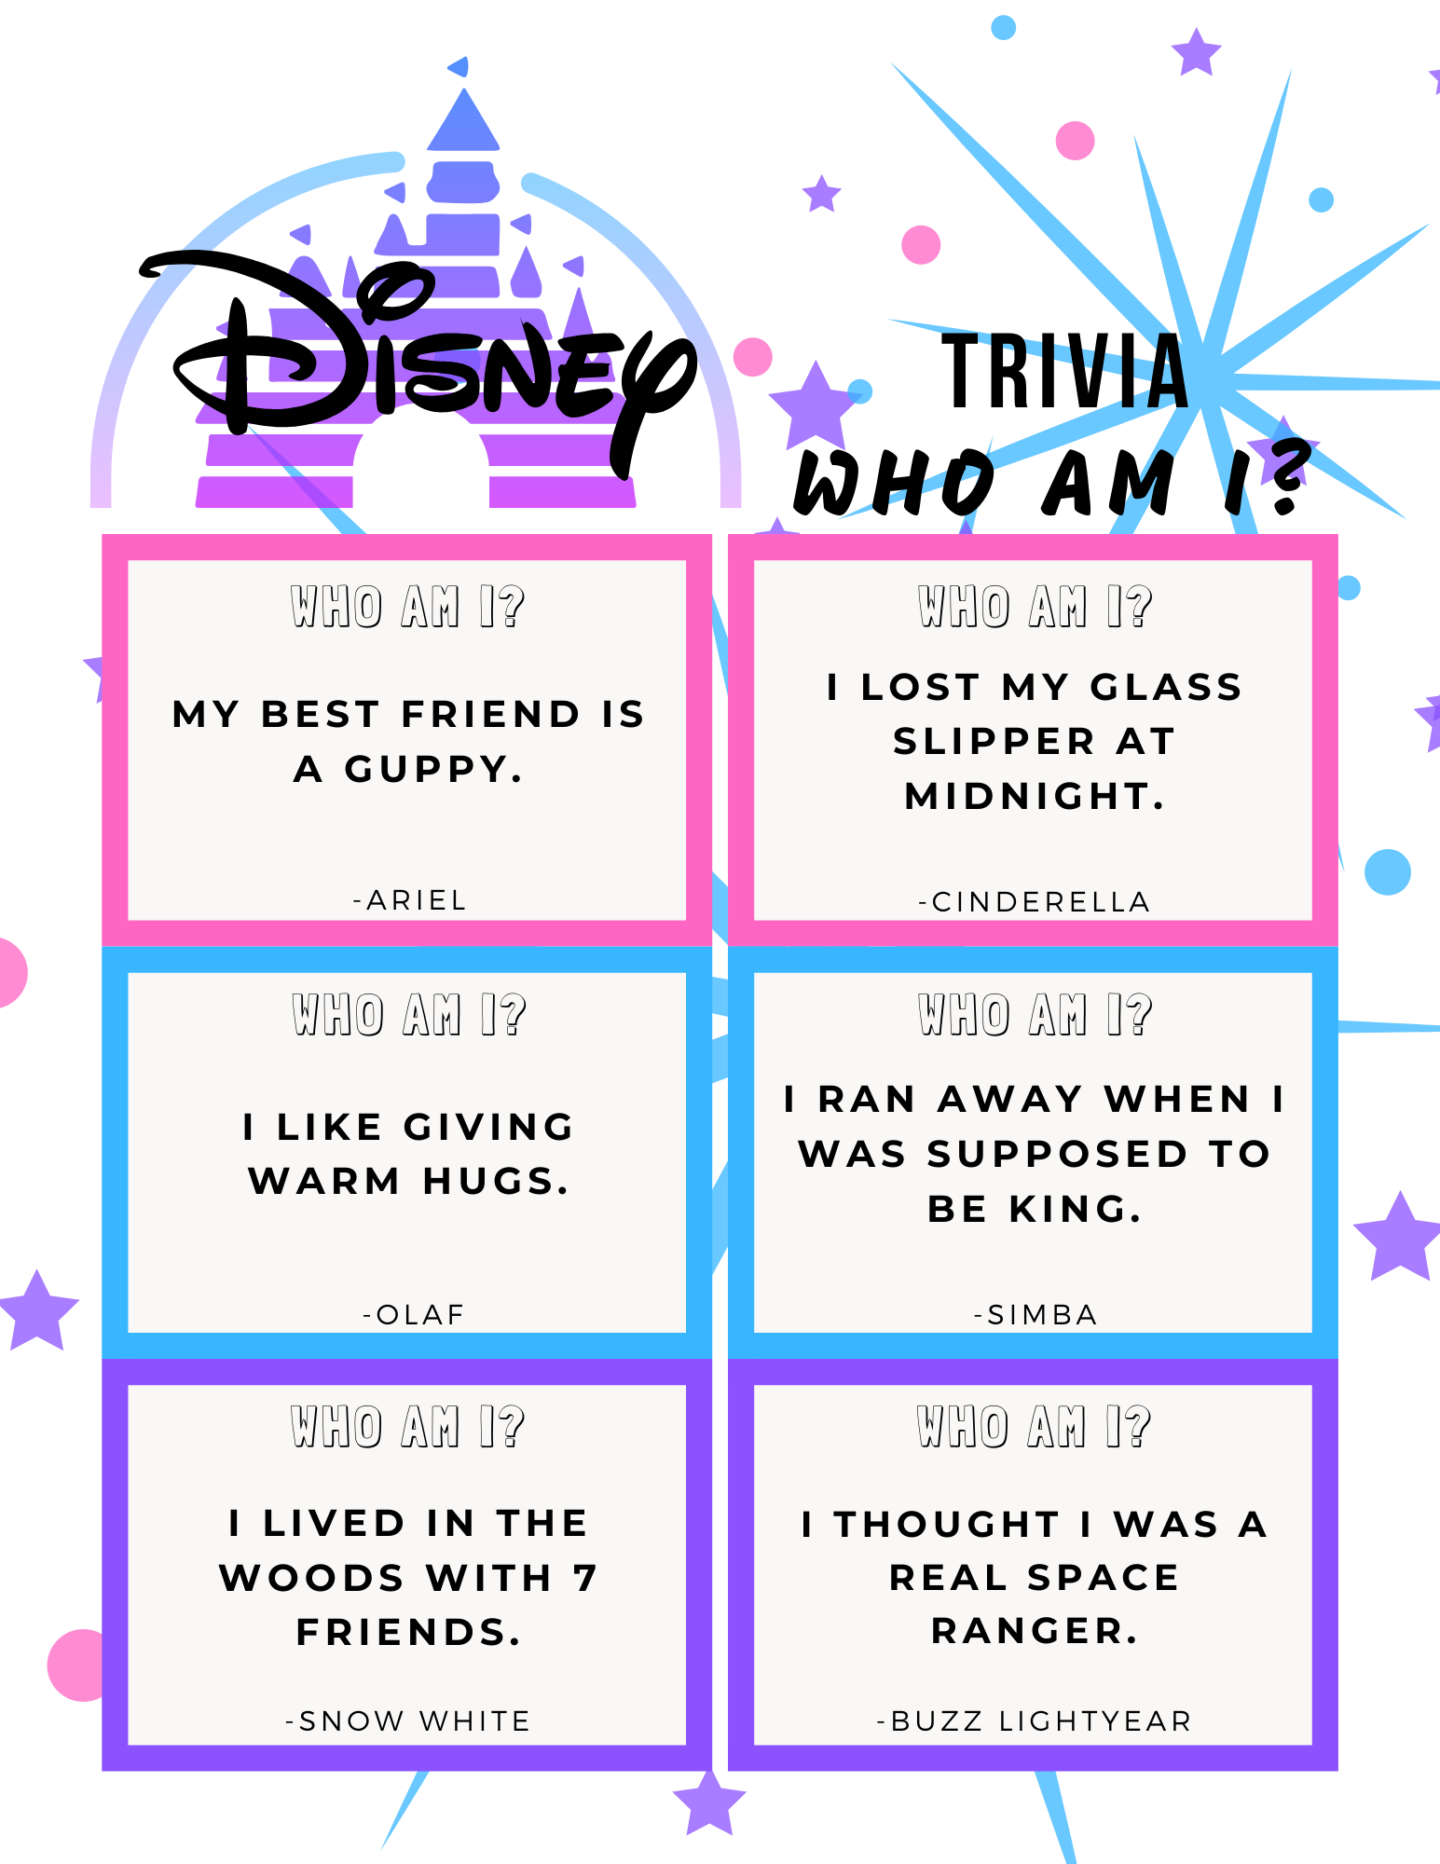 Kids Quiz - Name the Disney Character!